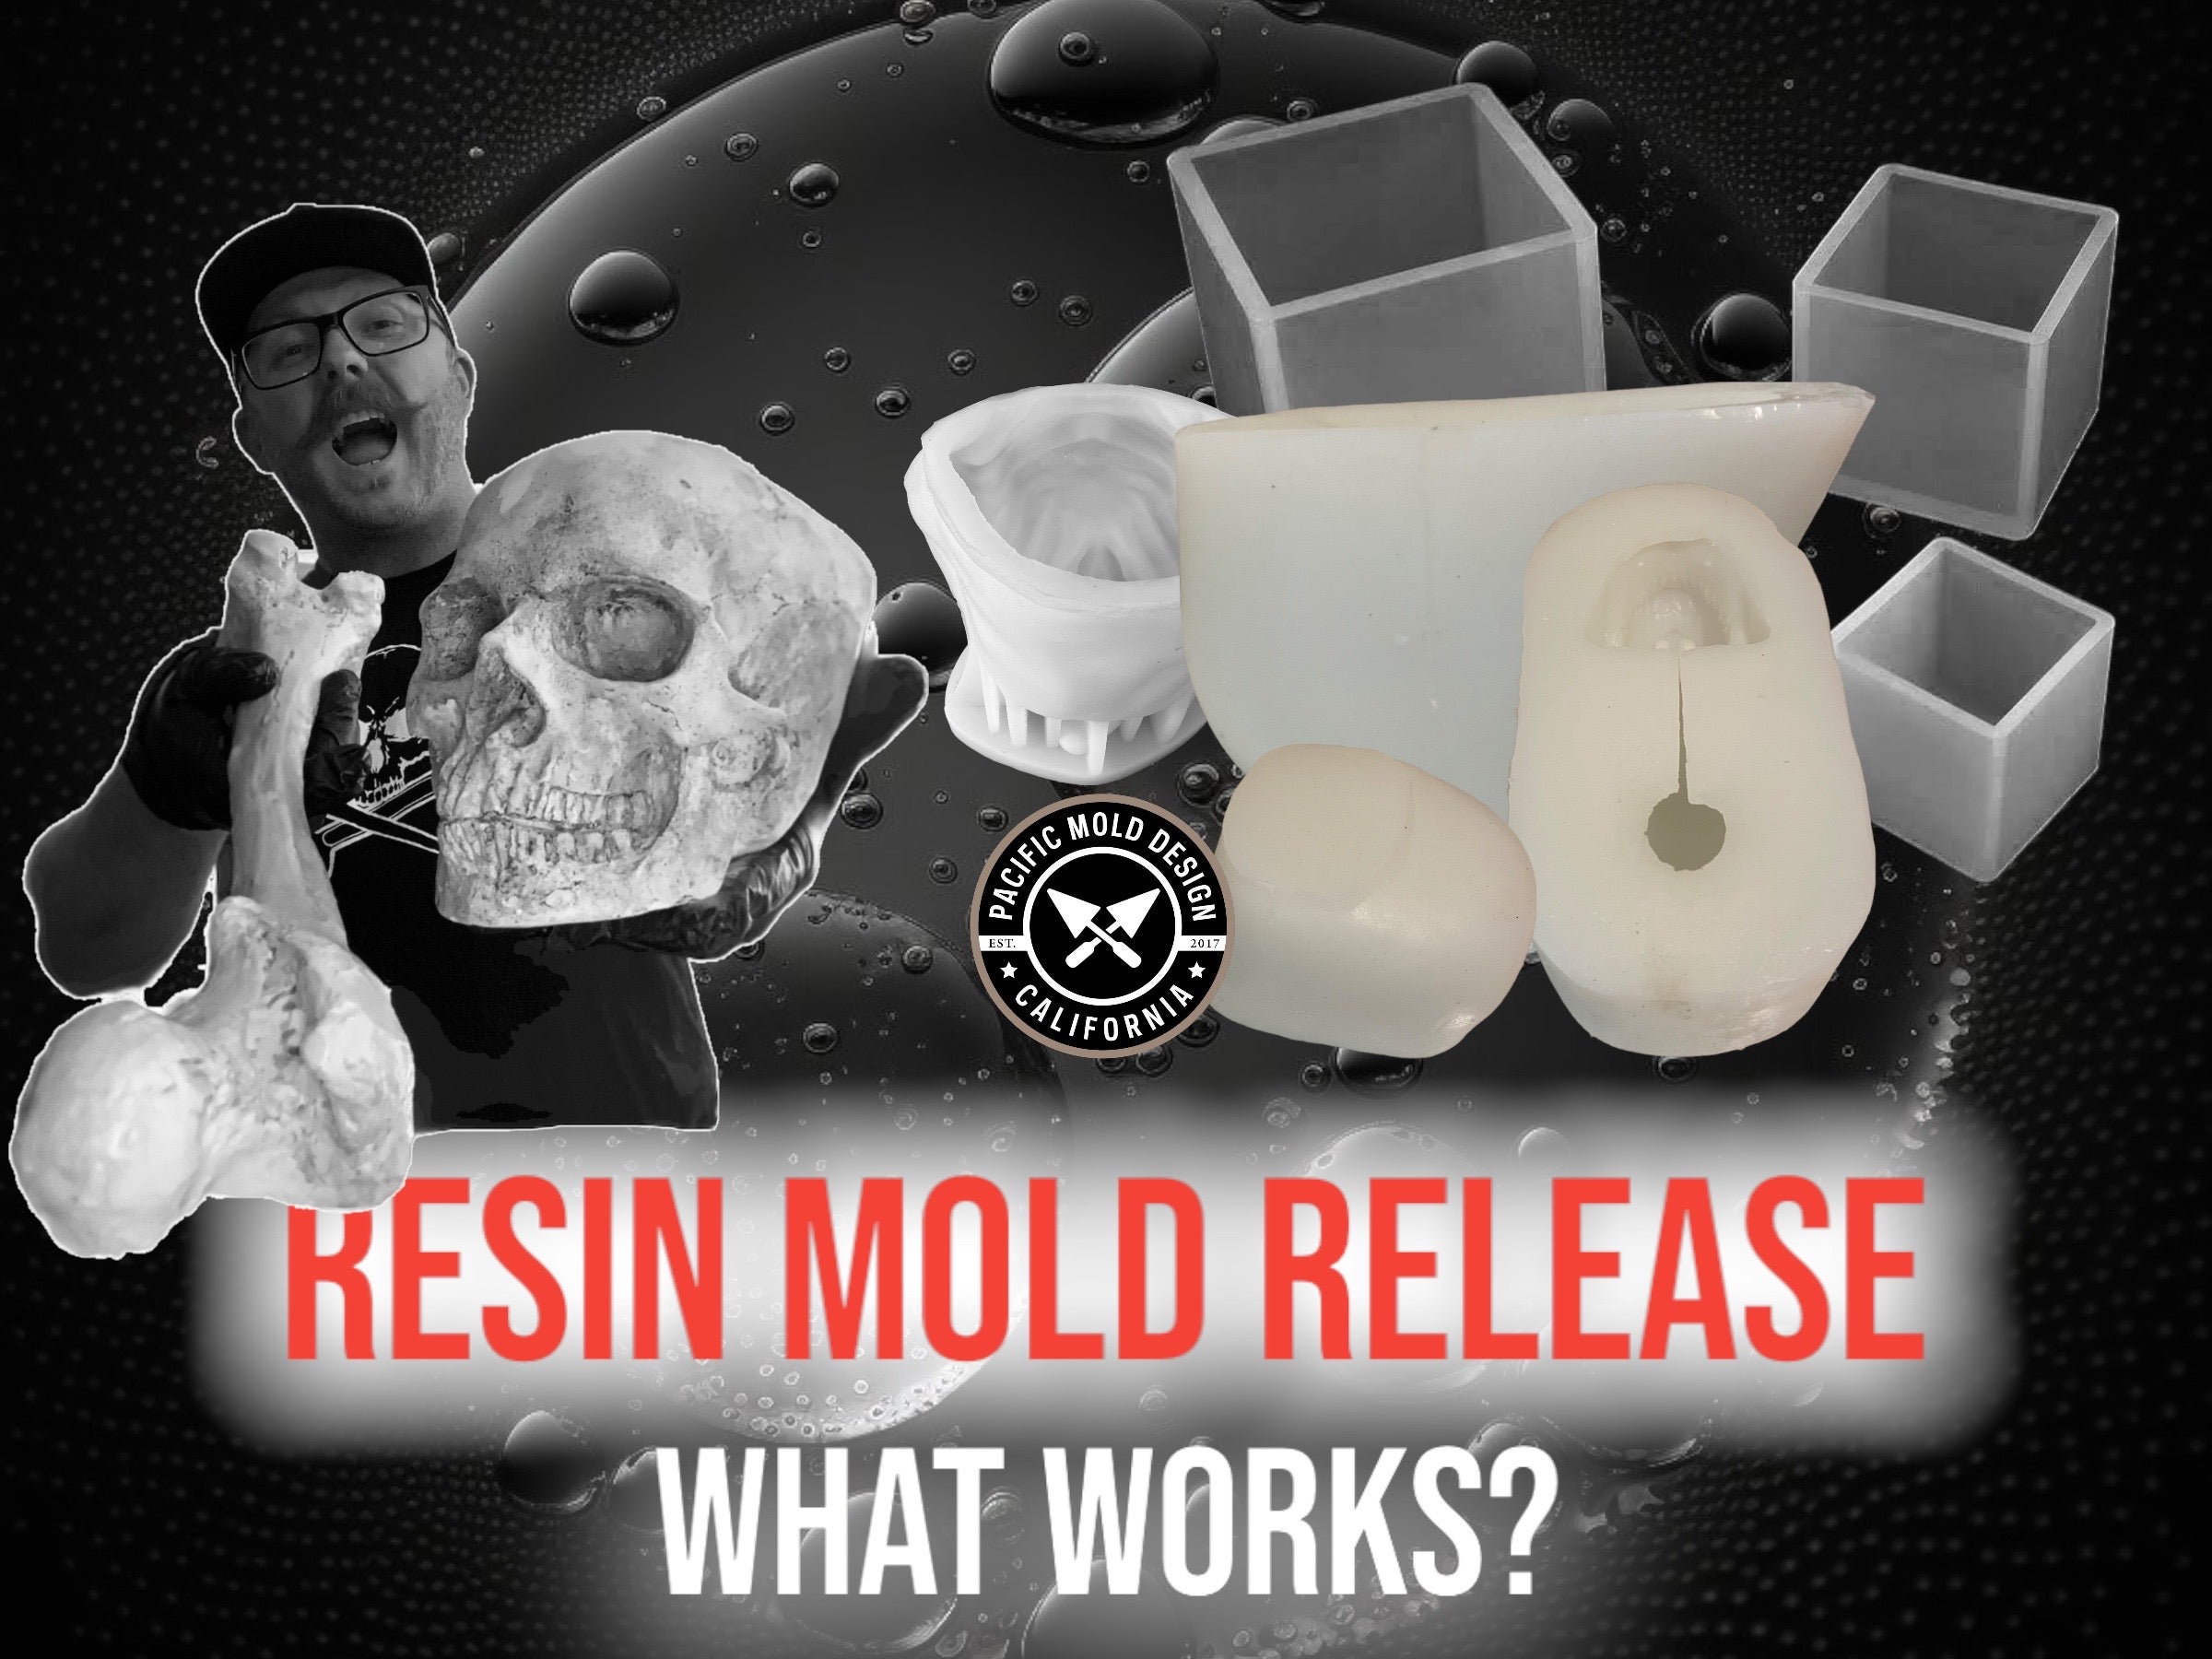 Mold Release Guide – The best Epoxy Release Agent - Apel USA